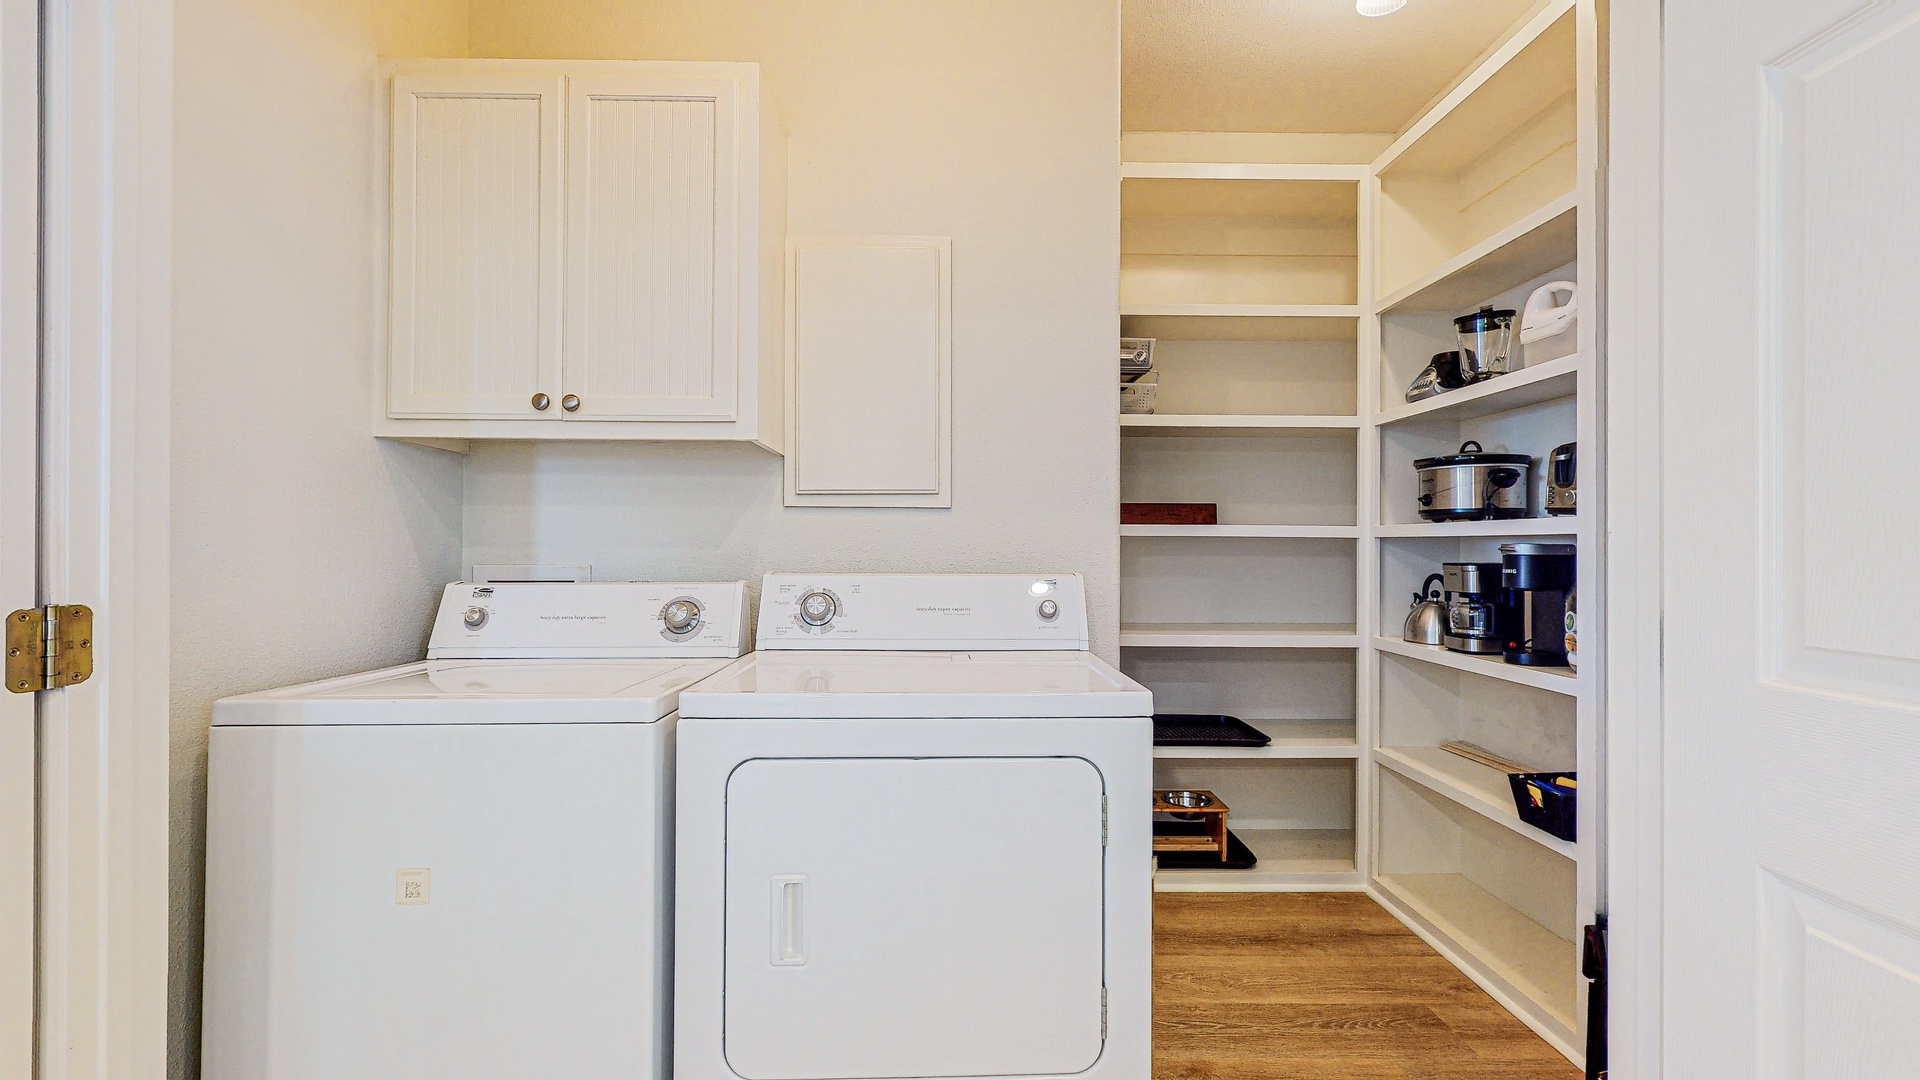 Laundry Room/ Walk in Pantry